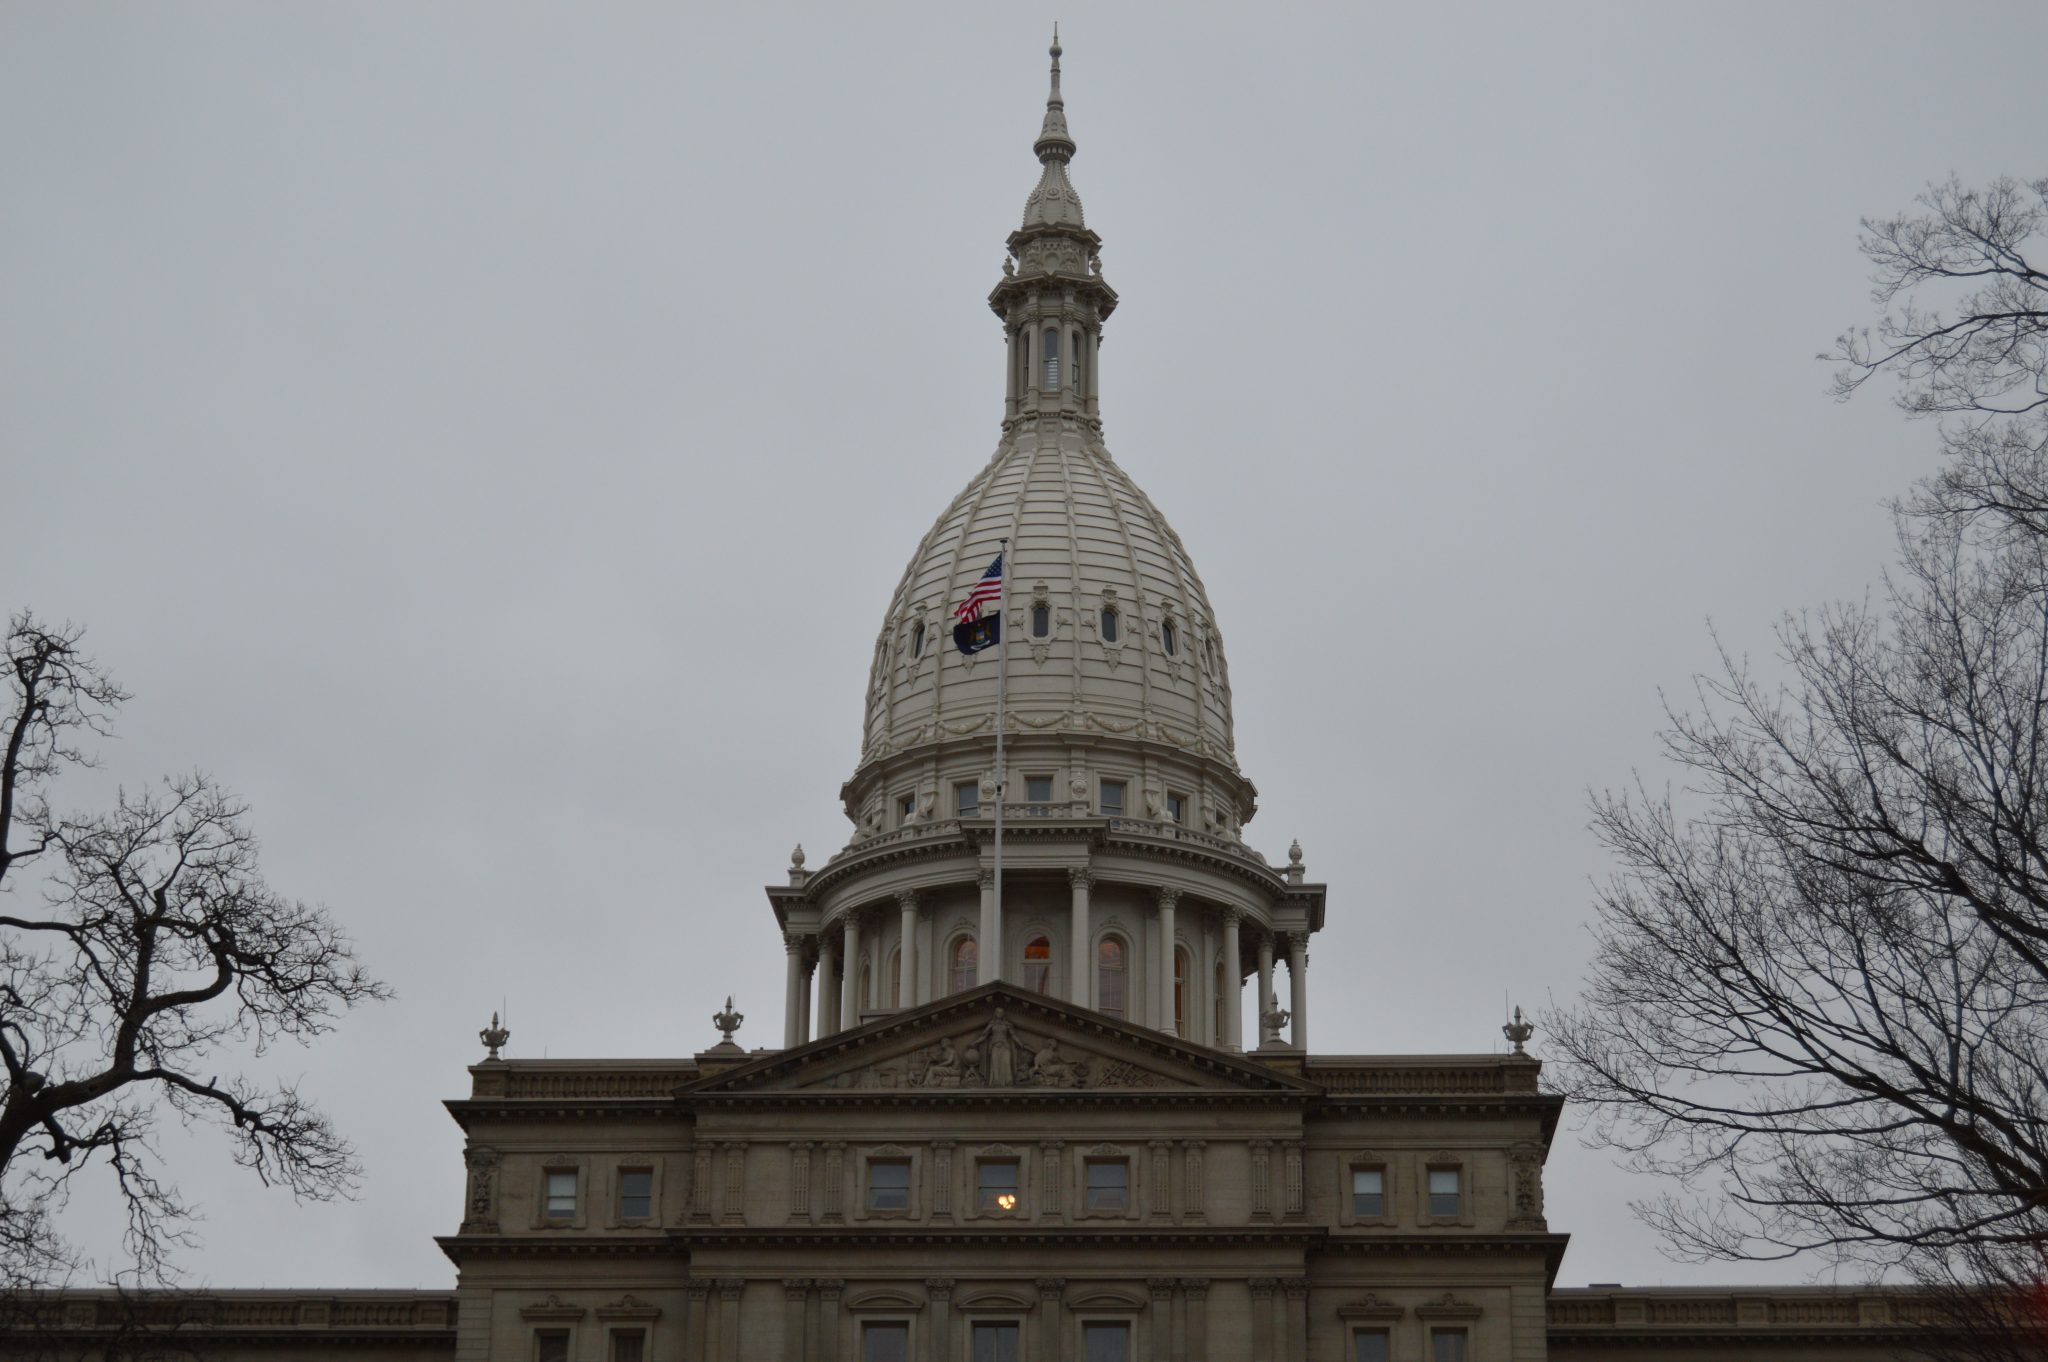 Michigan State Capitol building on a cloudy day